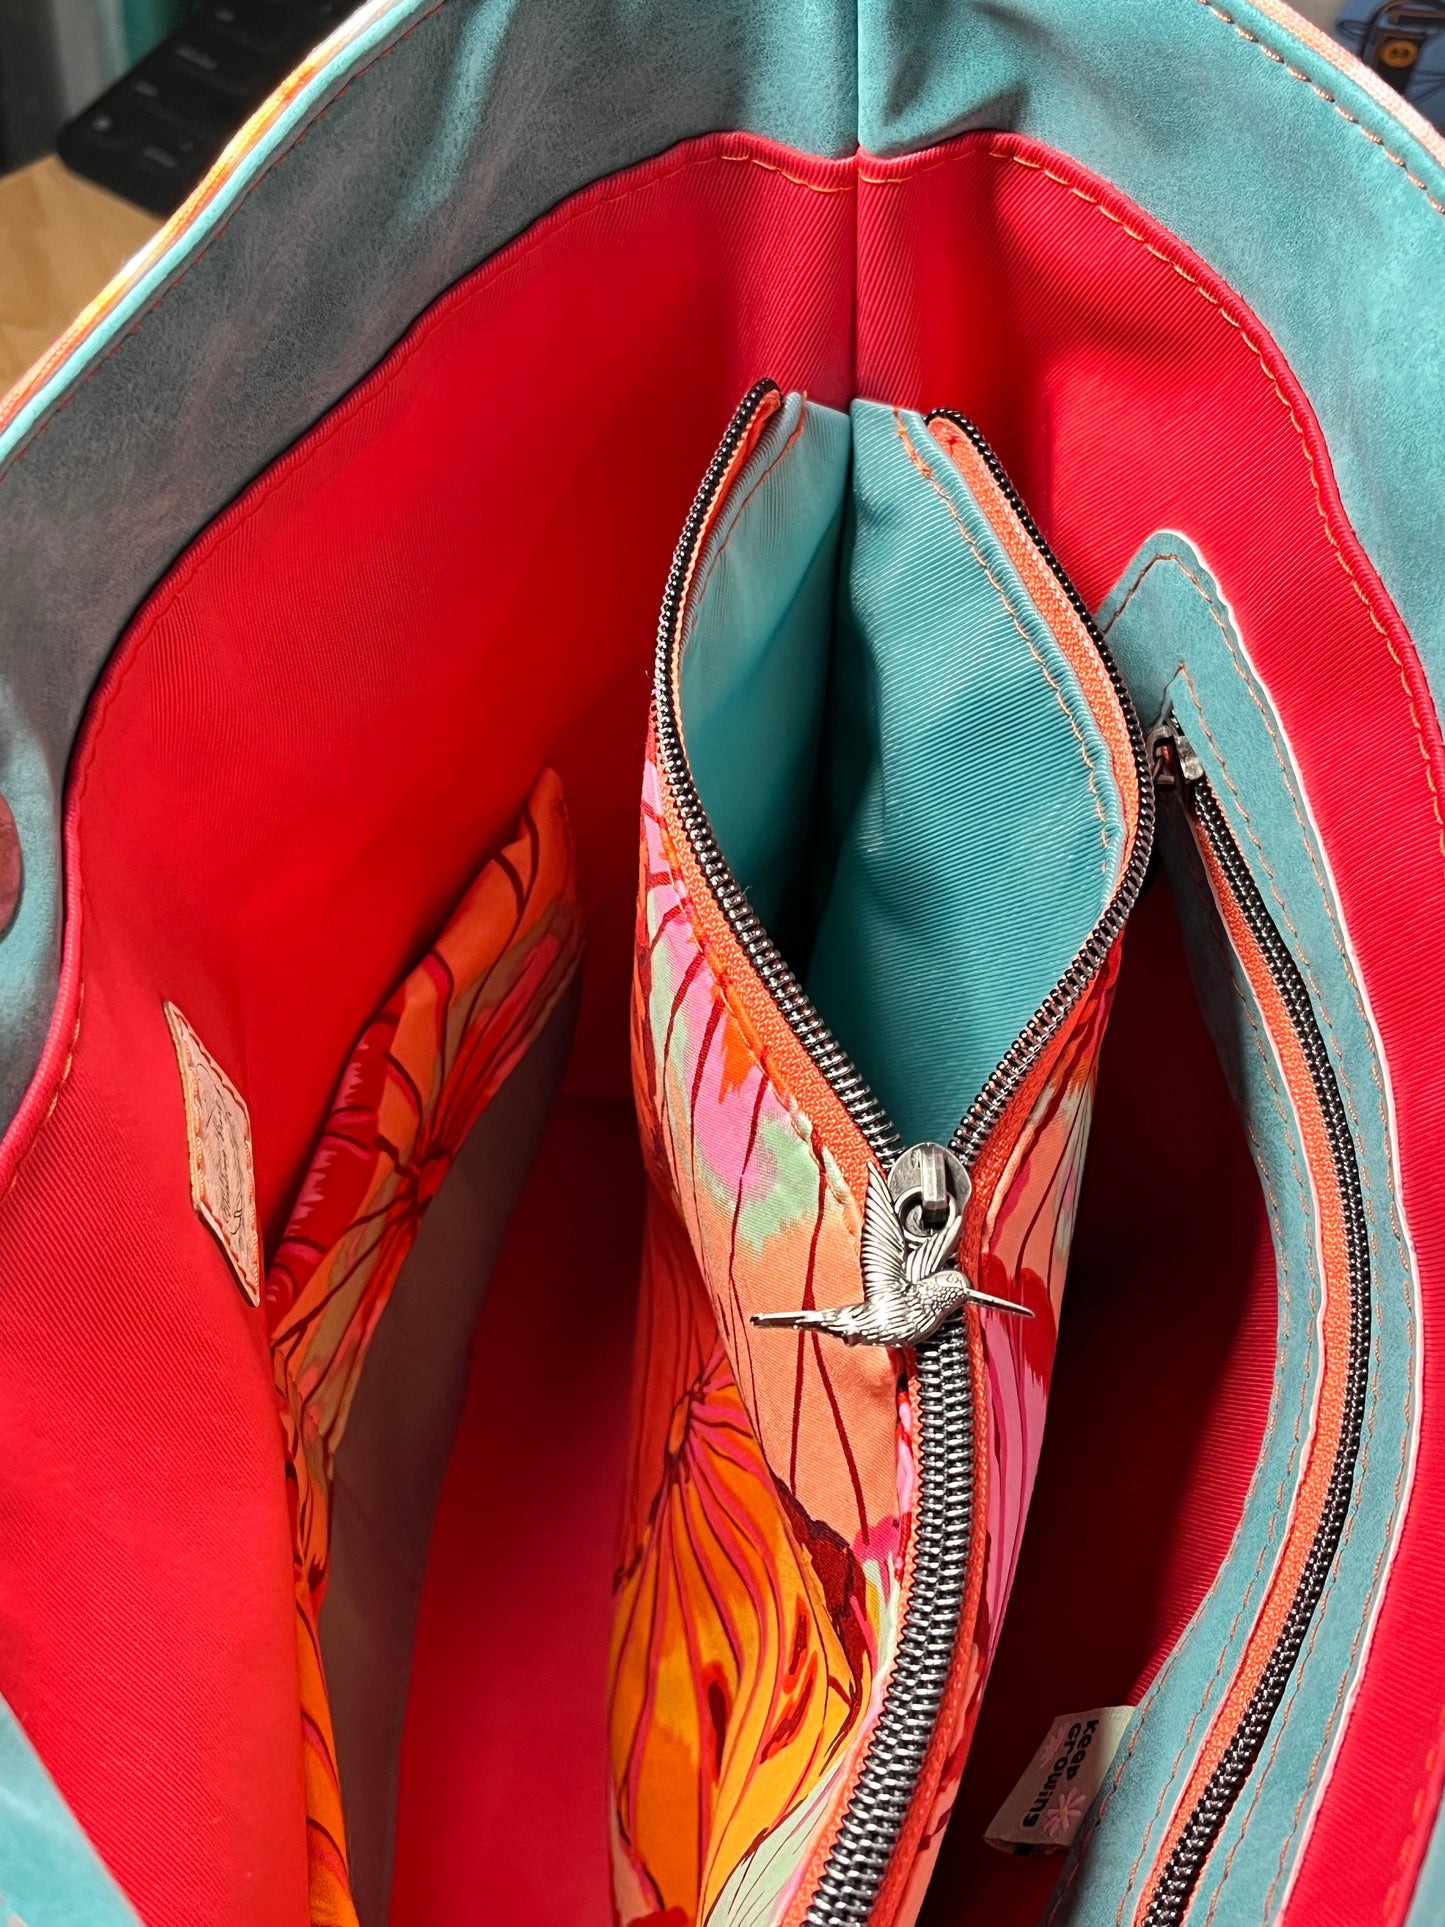 Coral & Teal - Tuesday Tote w/ Interior Zippers